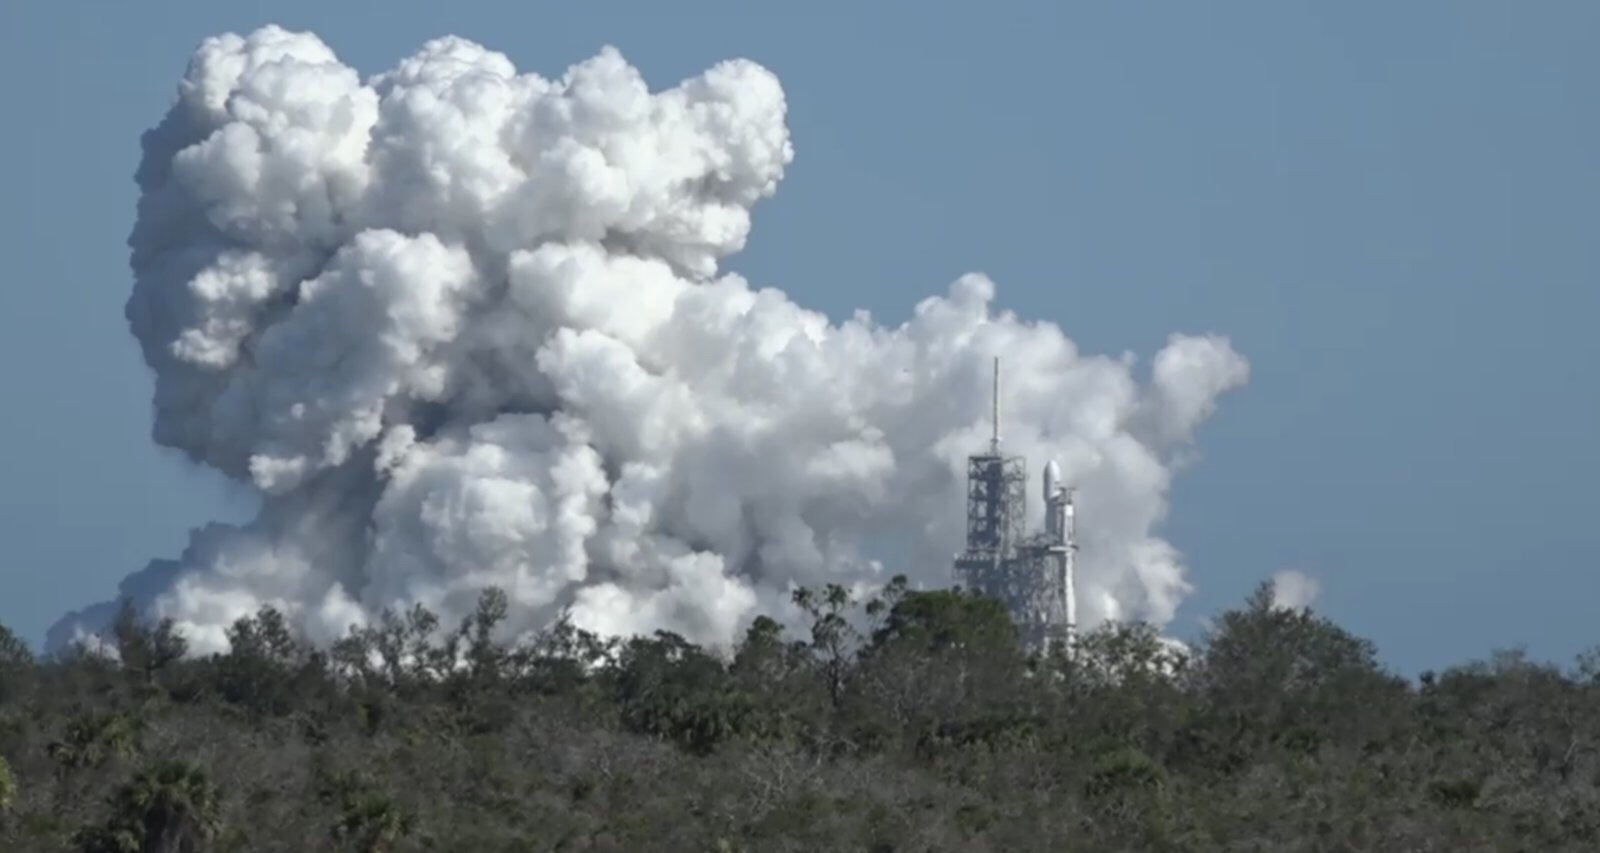 With government shutdown over, SpaceX is testing Falcon Heavy’s 27 engines